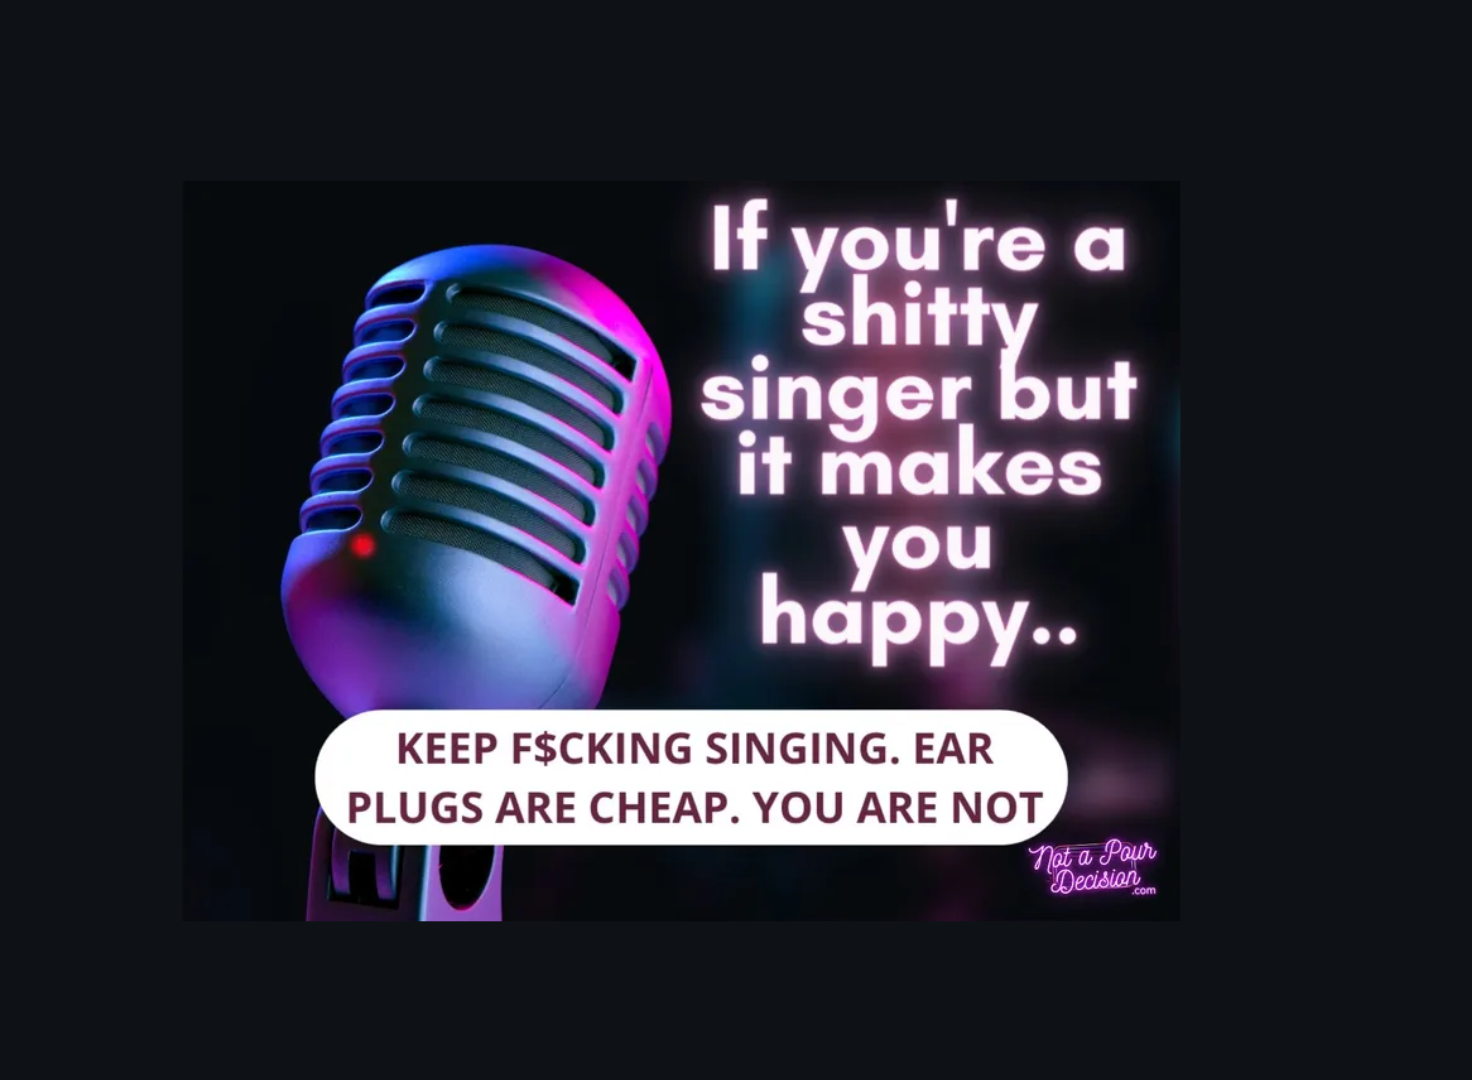 SING, if that makes you happy!